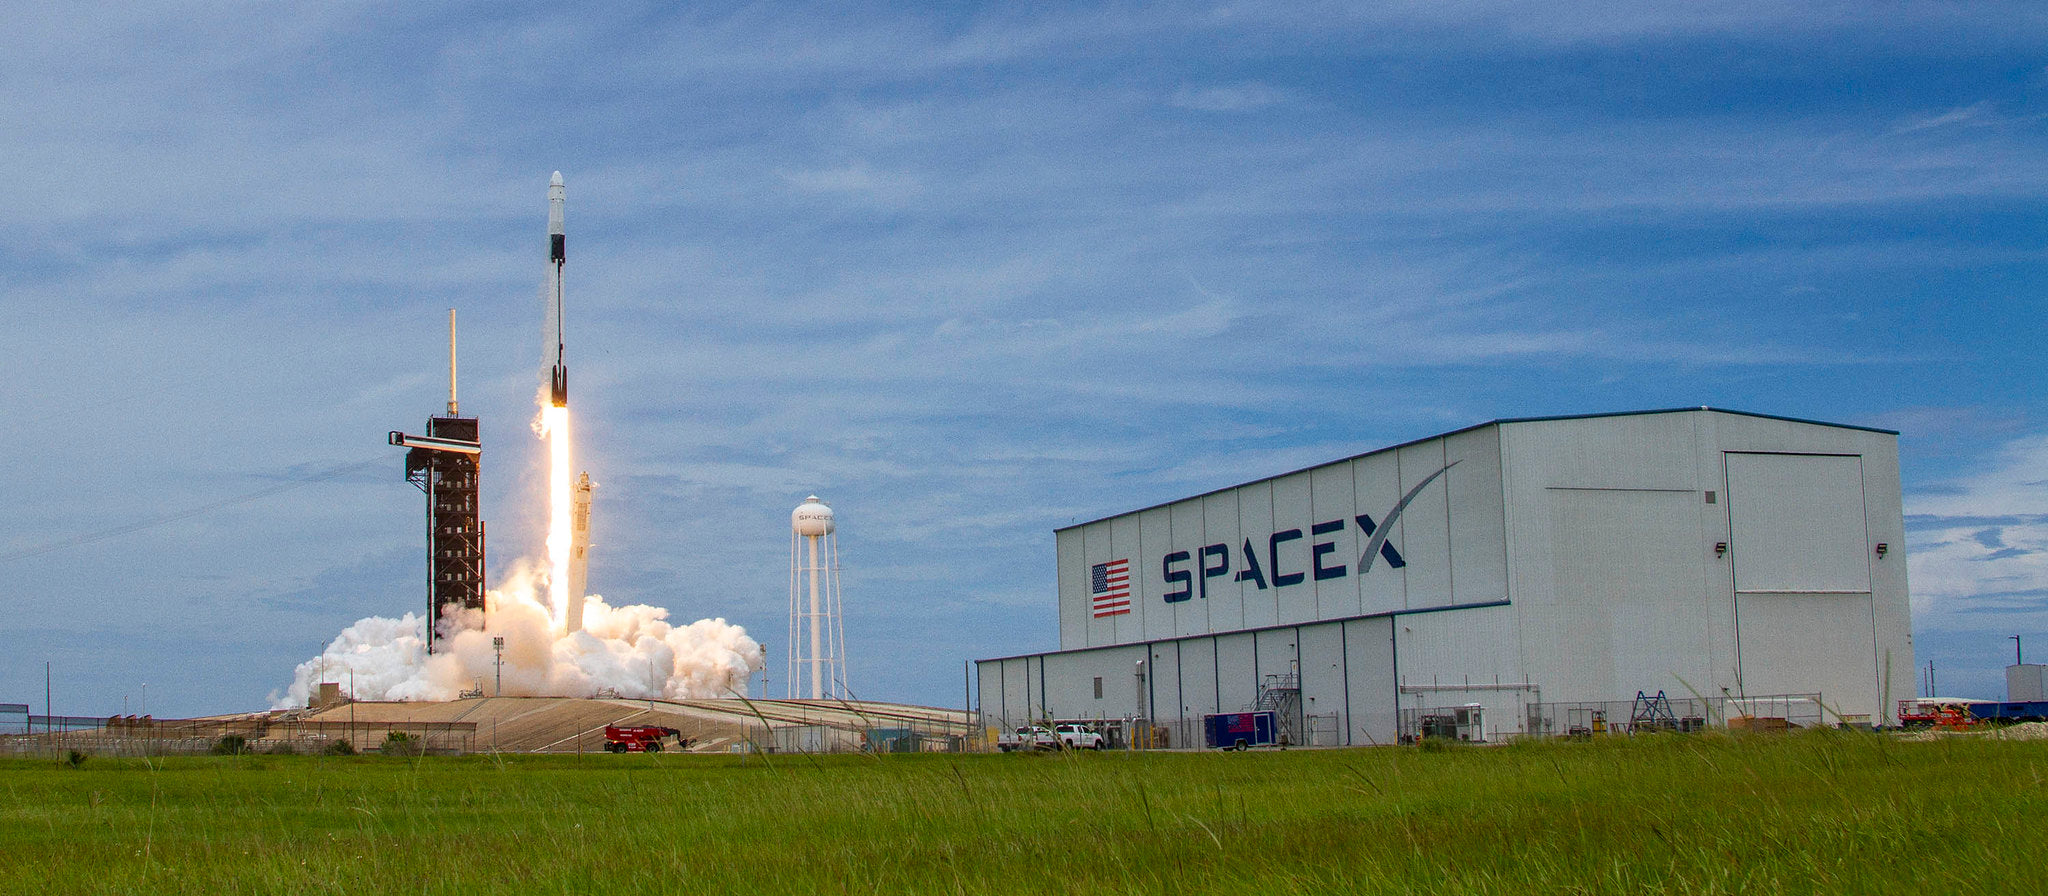 SpaceX Will Launch Varda Space Industries' First Module To Manufacture Products In Space